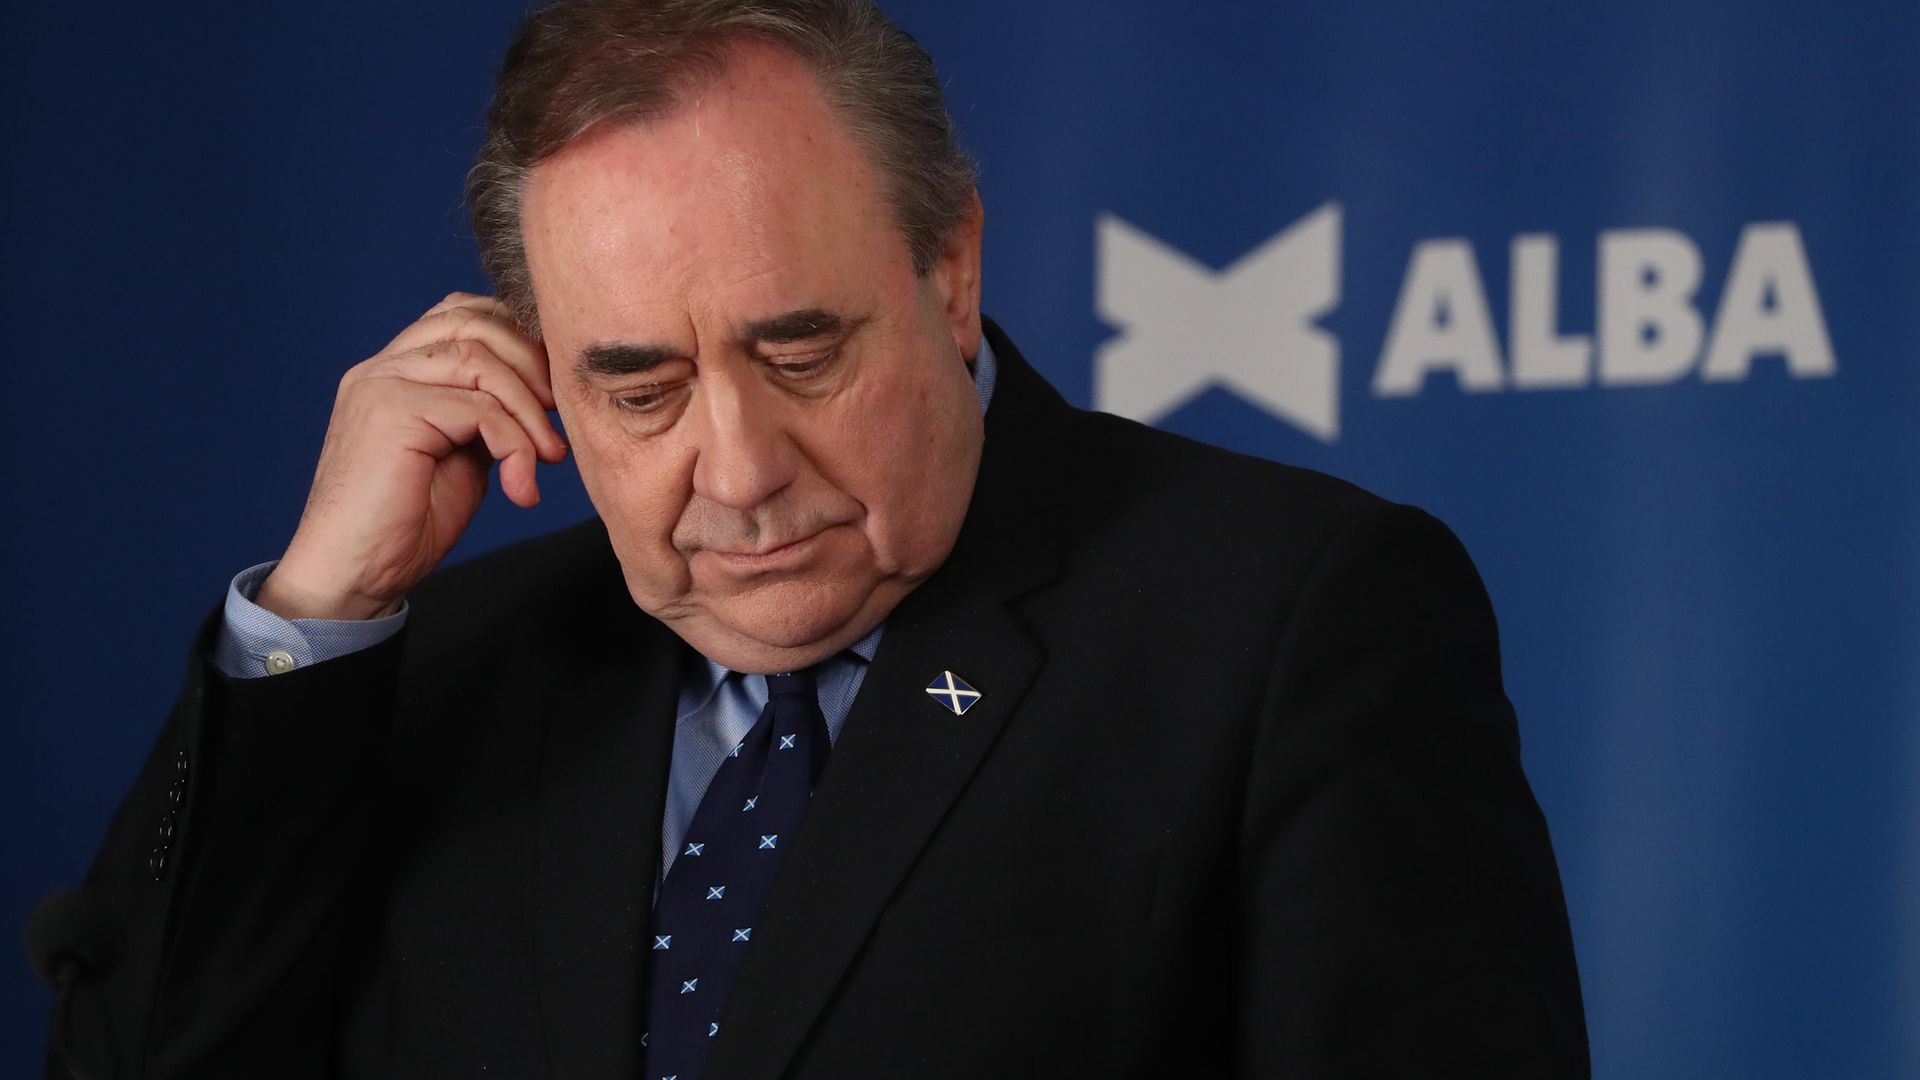 Alex Salmond claims broadcasters 'censoring' Alba Party